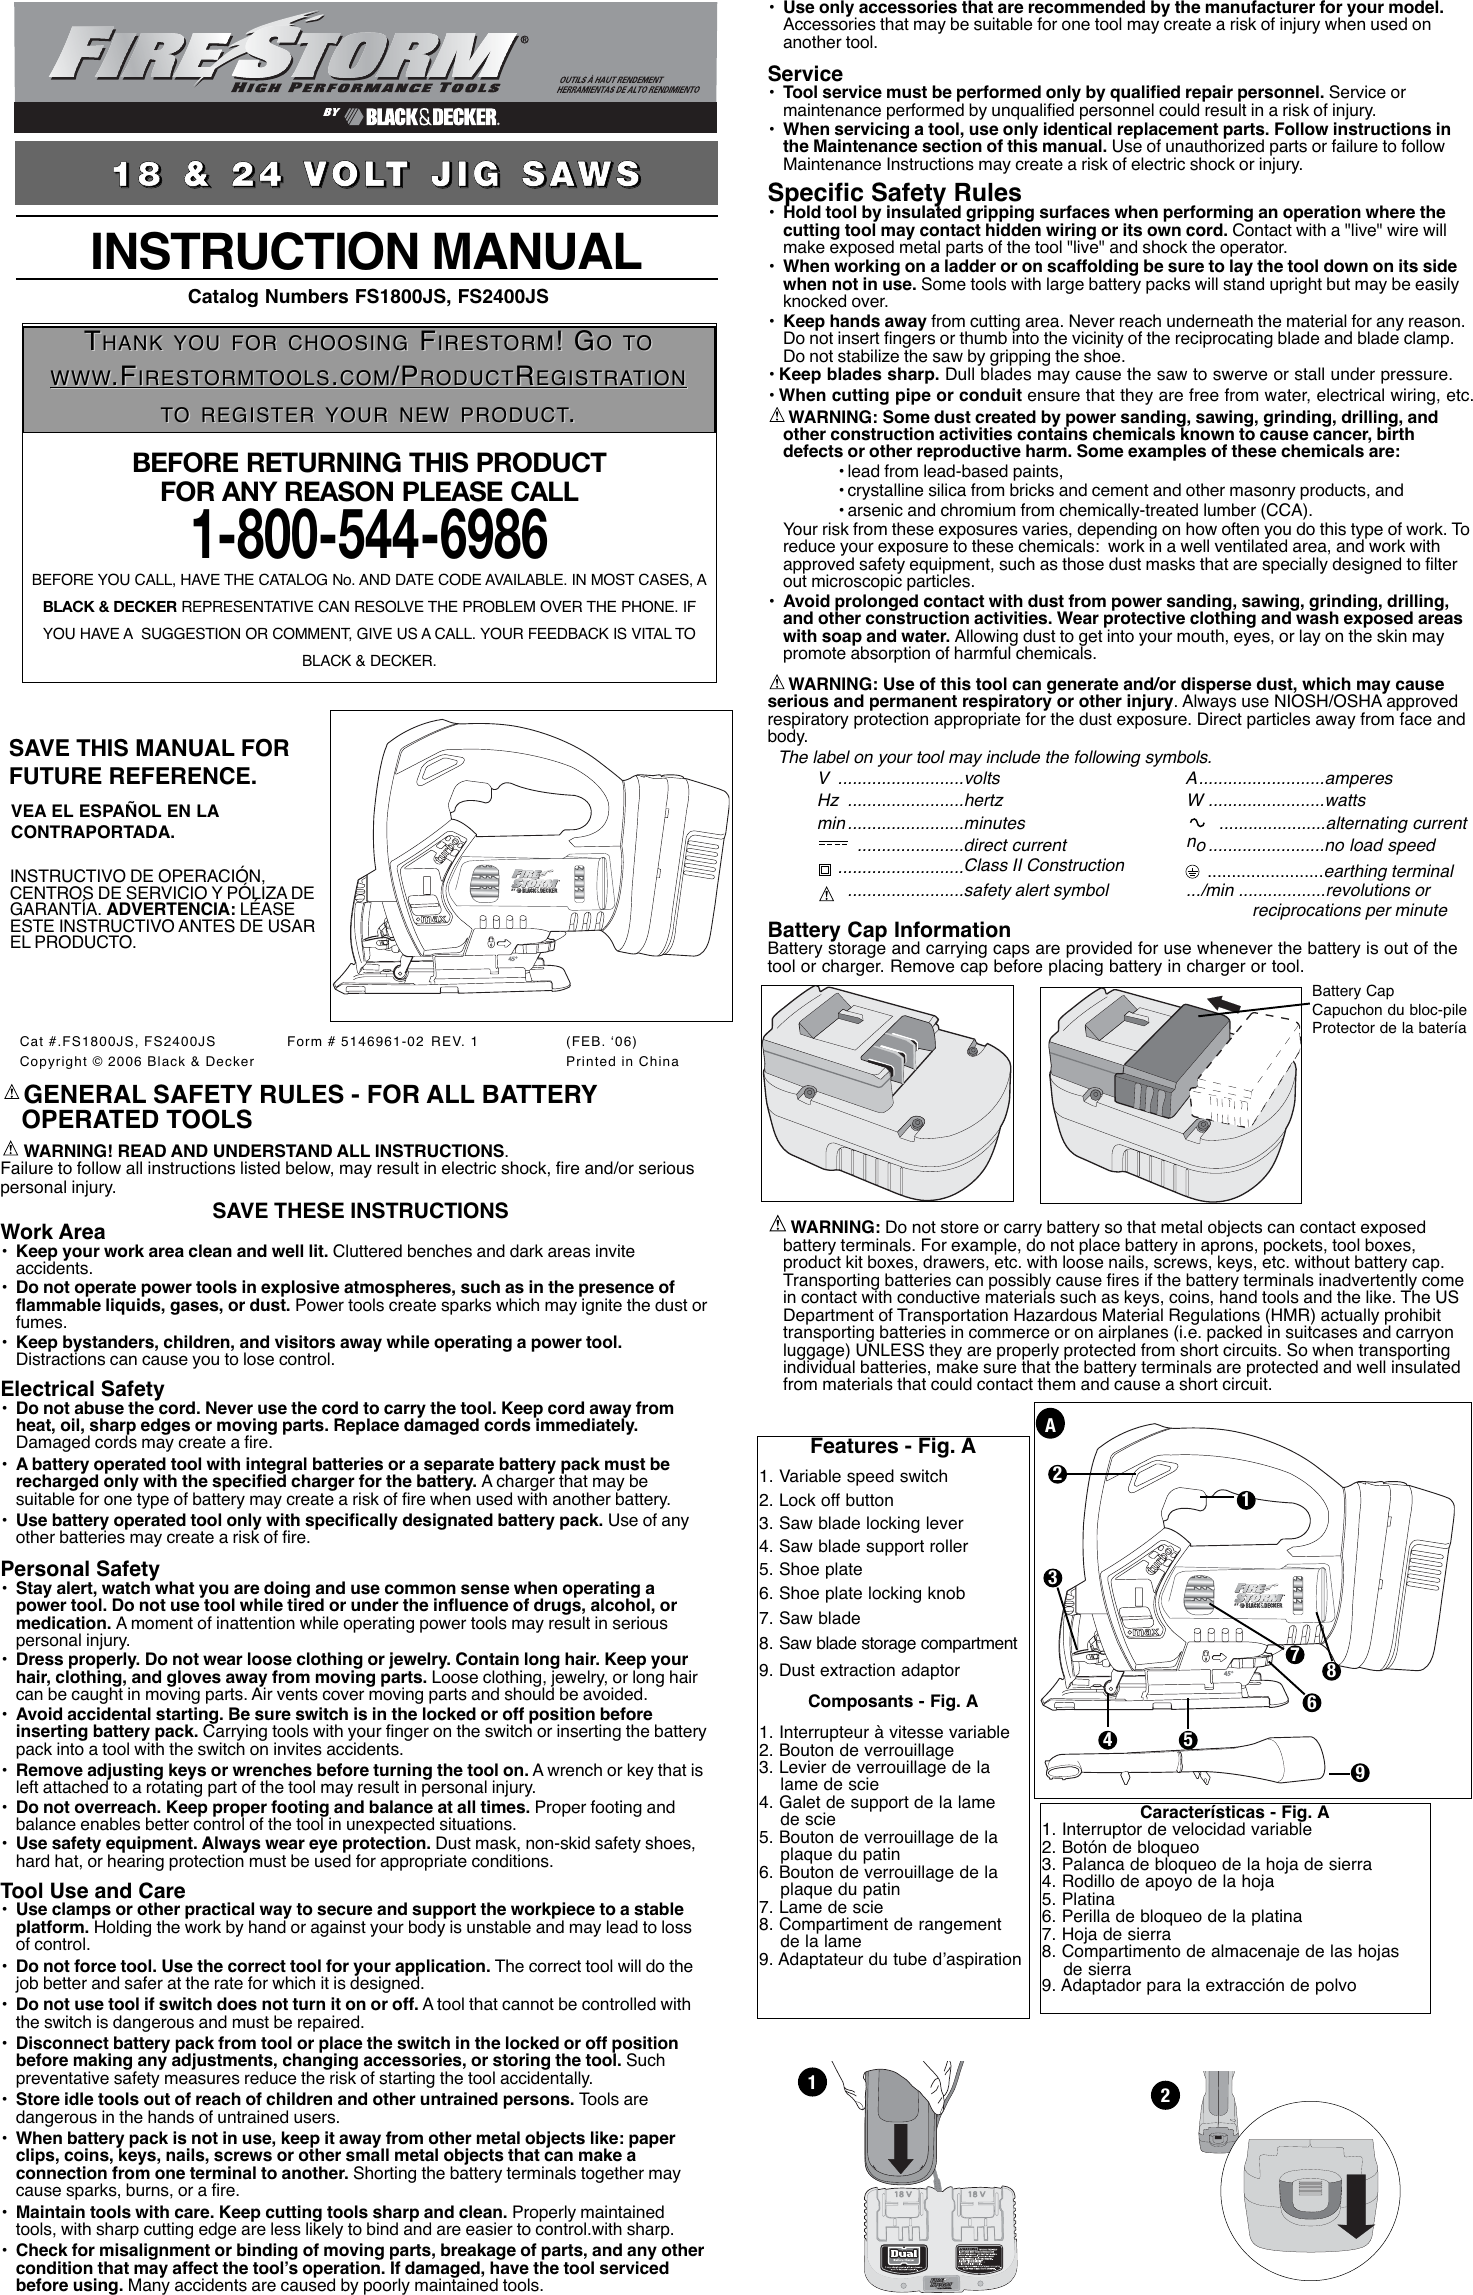 Page 1 of 7 - Black-And-Decker Black-And-Decker-Fire-Storm-5146961-02-Instruction-Manual- 5146961-02,01fs1800 Fs2400  Black-and-decker-fire-storm-5146961-02-instruction-manual